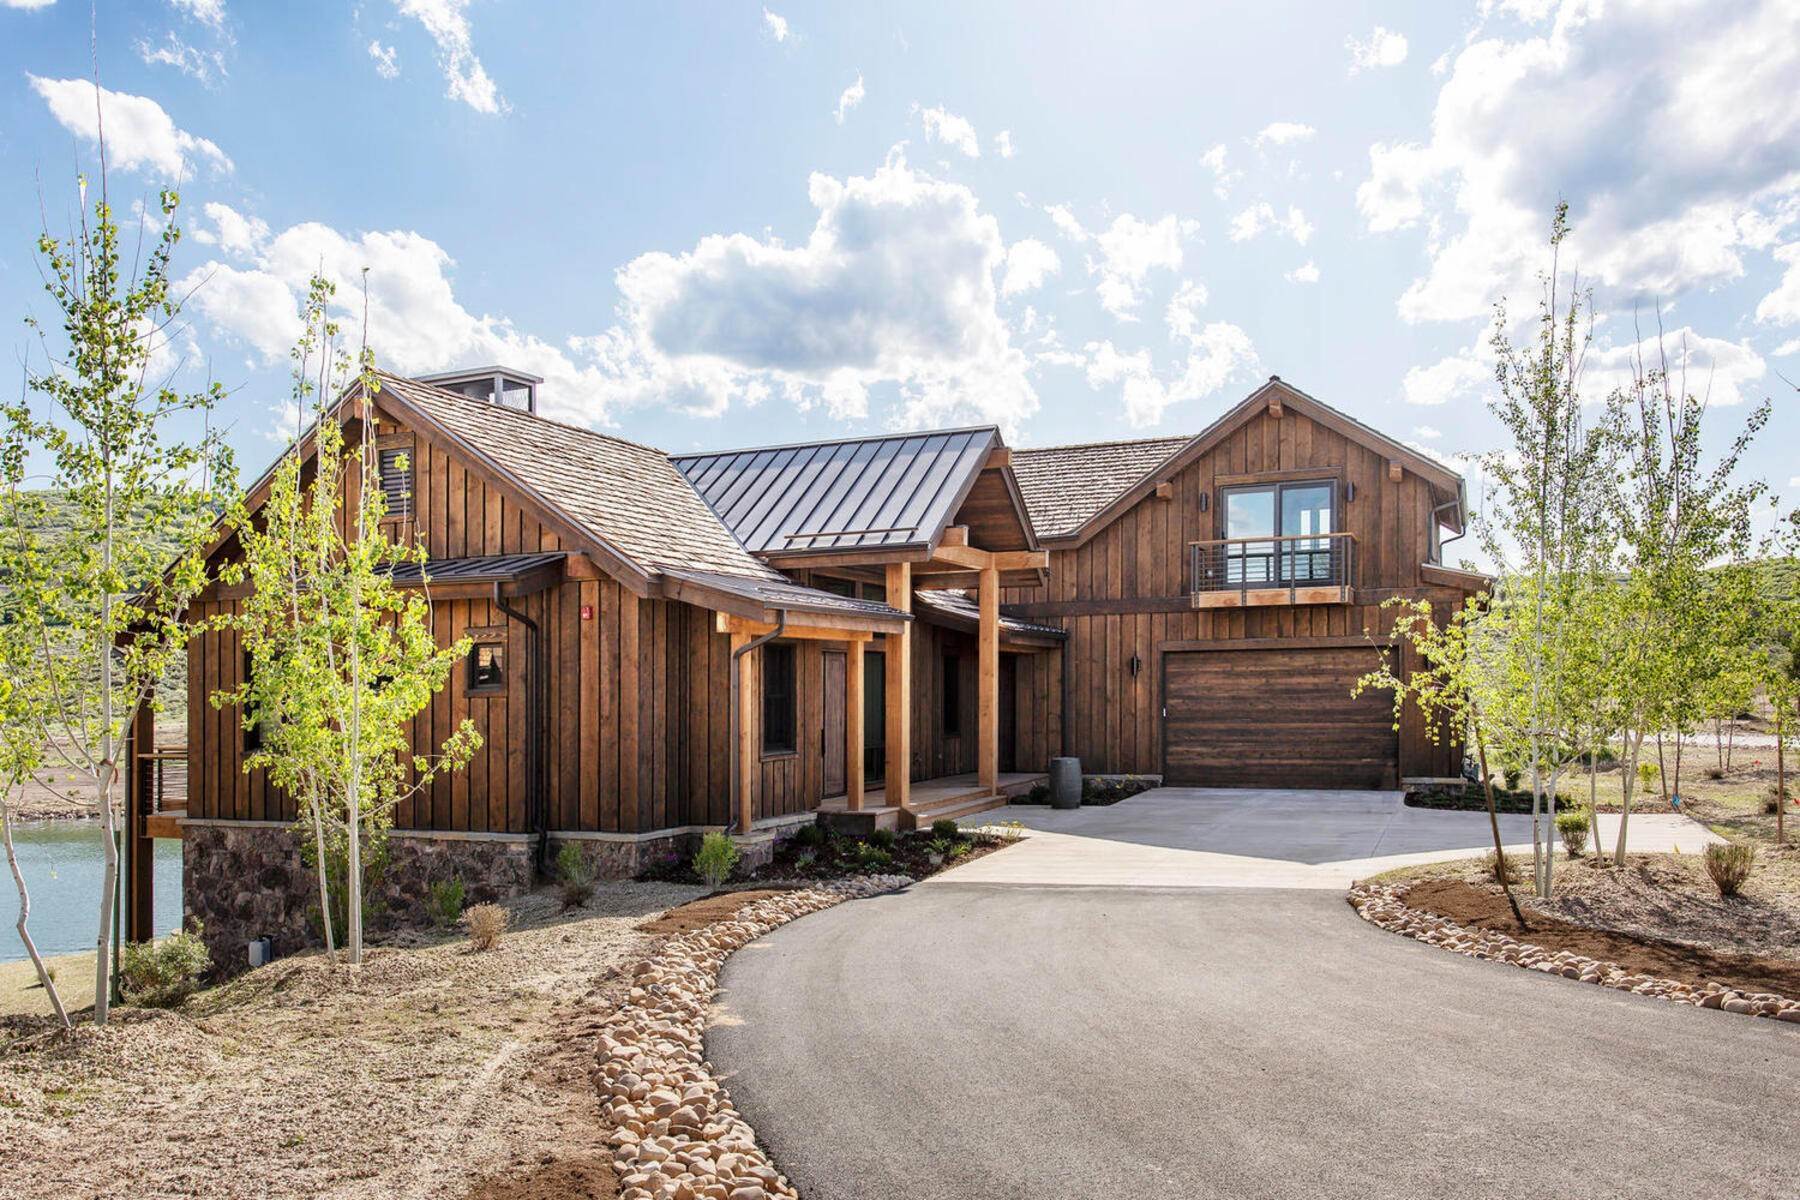 Property for Sale at 5 Bedroom Expanded Juniper Cabin at Victory Ranch on 2.3 Acres! 6434 Whispering Way, #373A Heber City, Utah 84093 United States